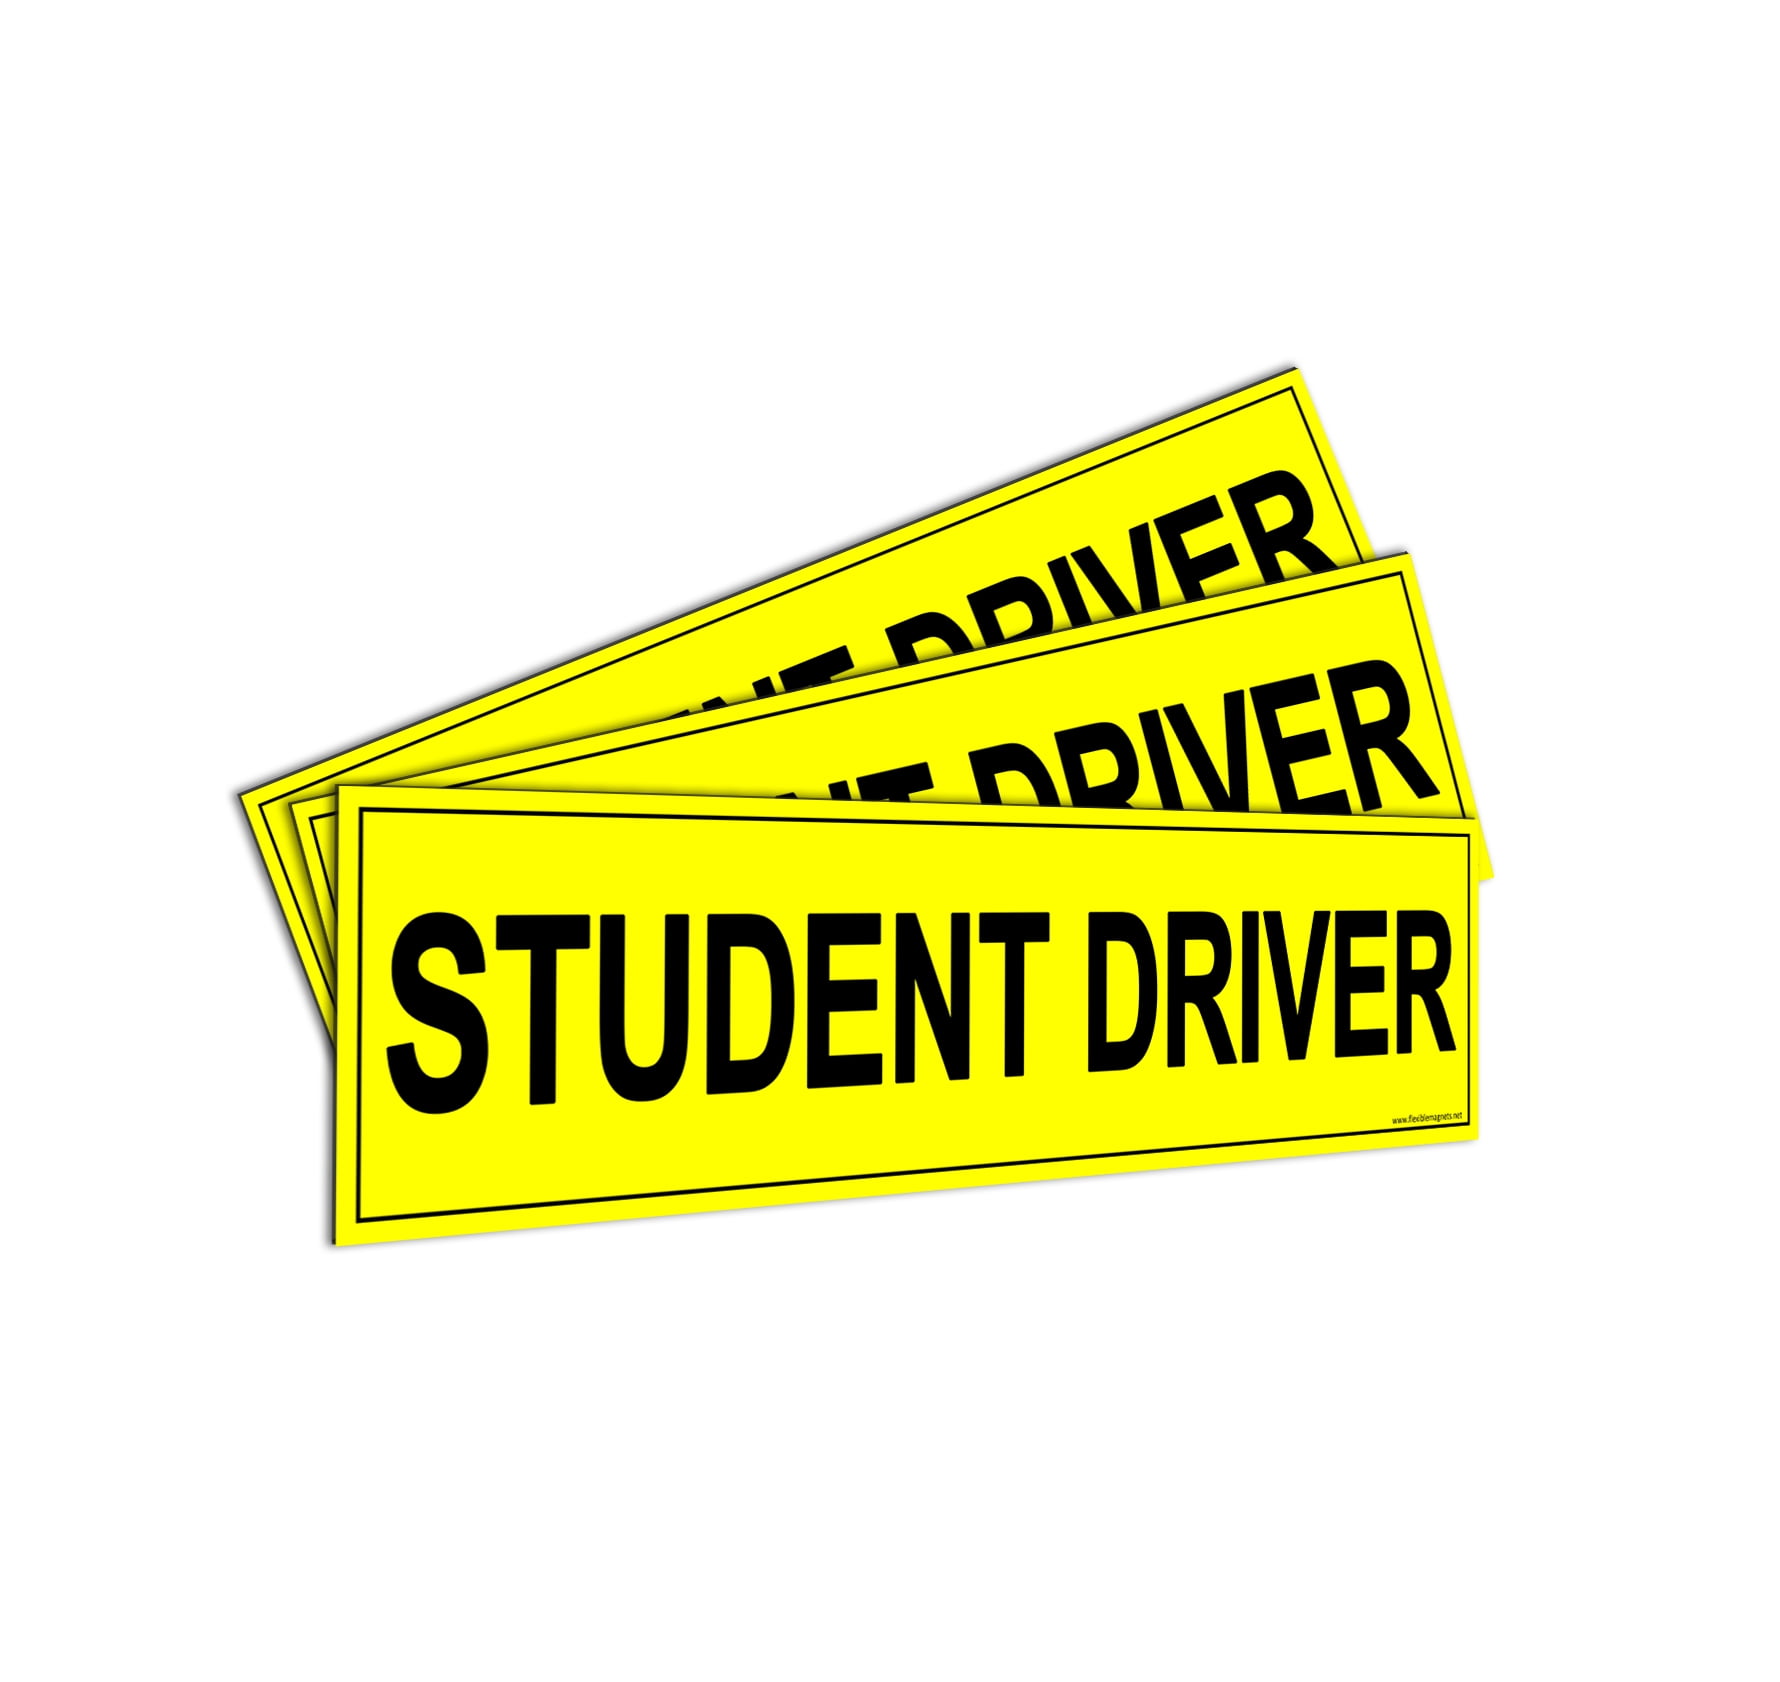 Magnetic sign Driving Instructor Training vehicle signage Learner